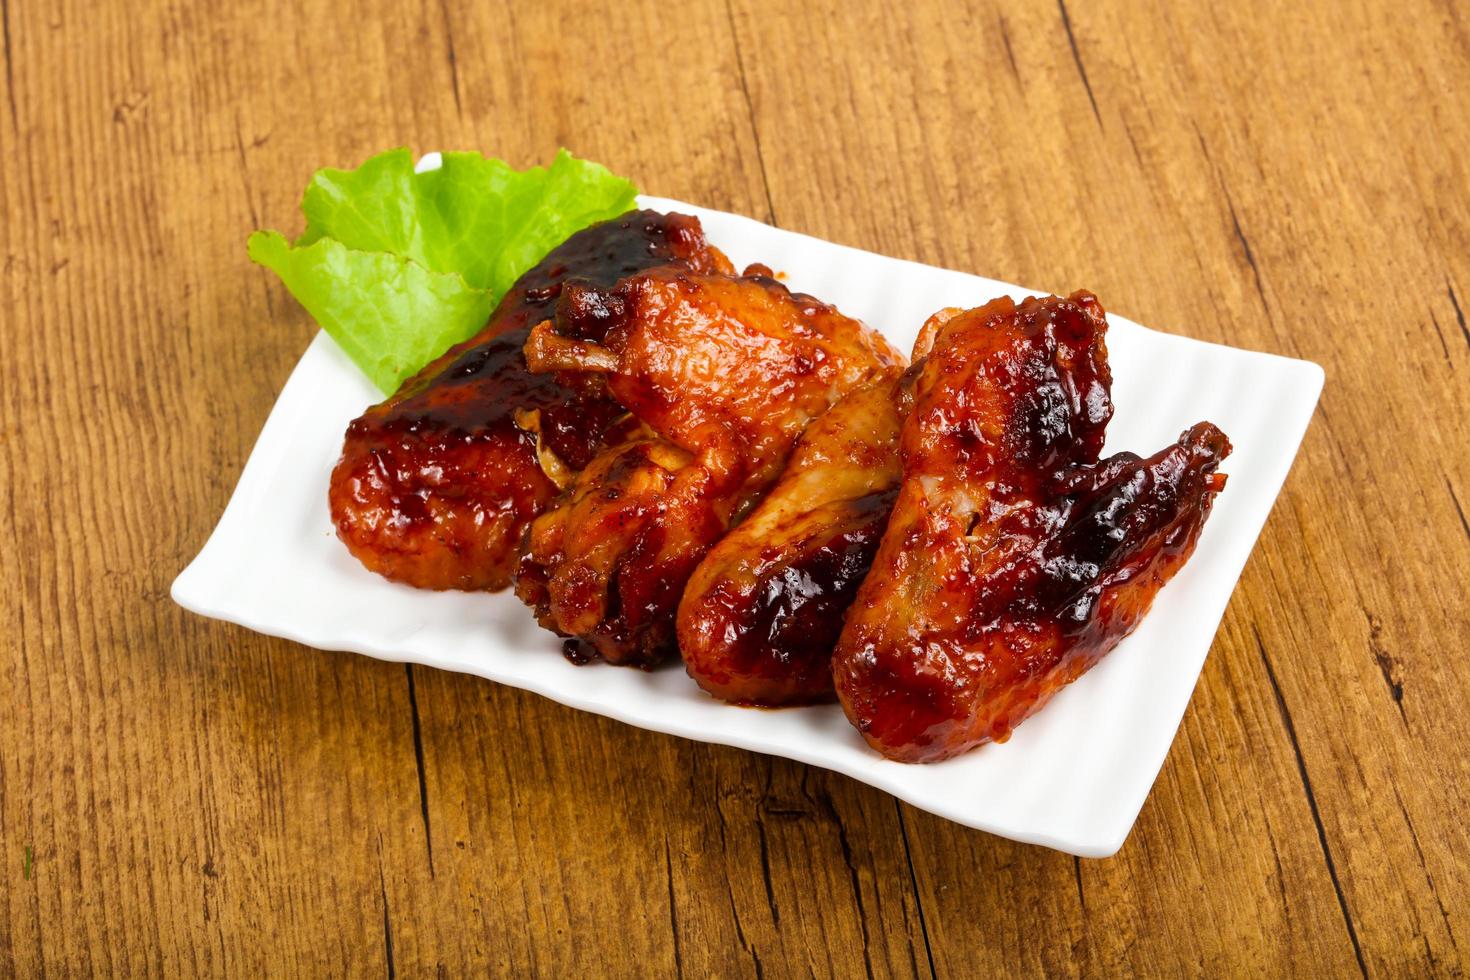 Chicken wings on the plate and wooden background photo